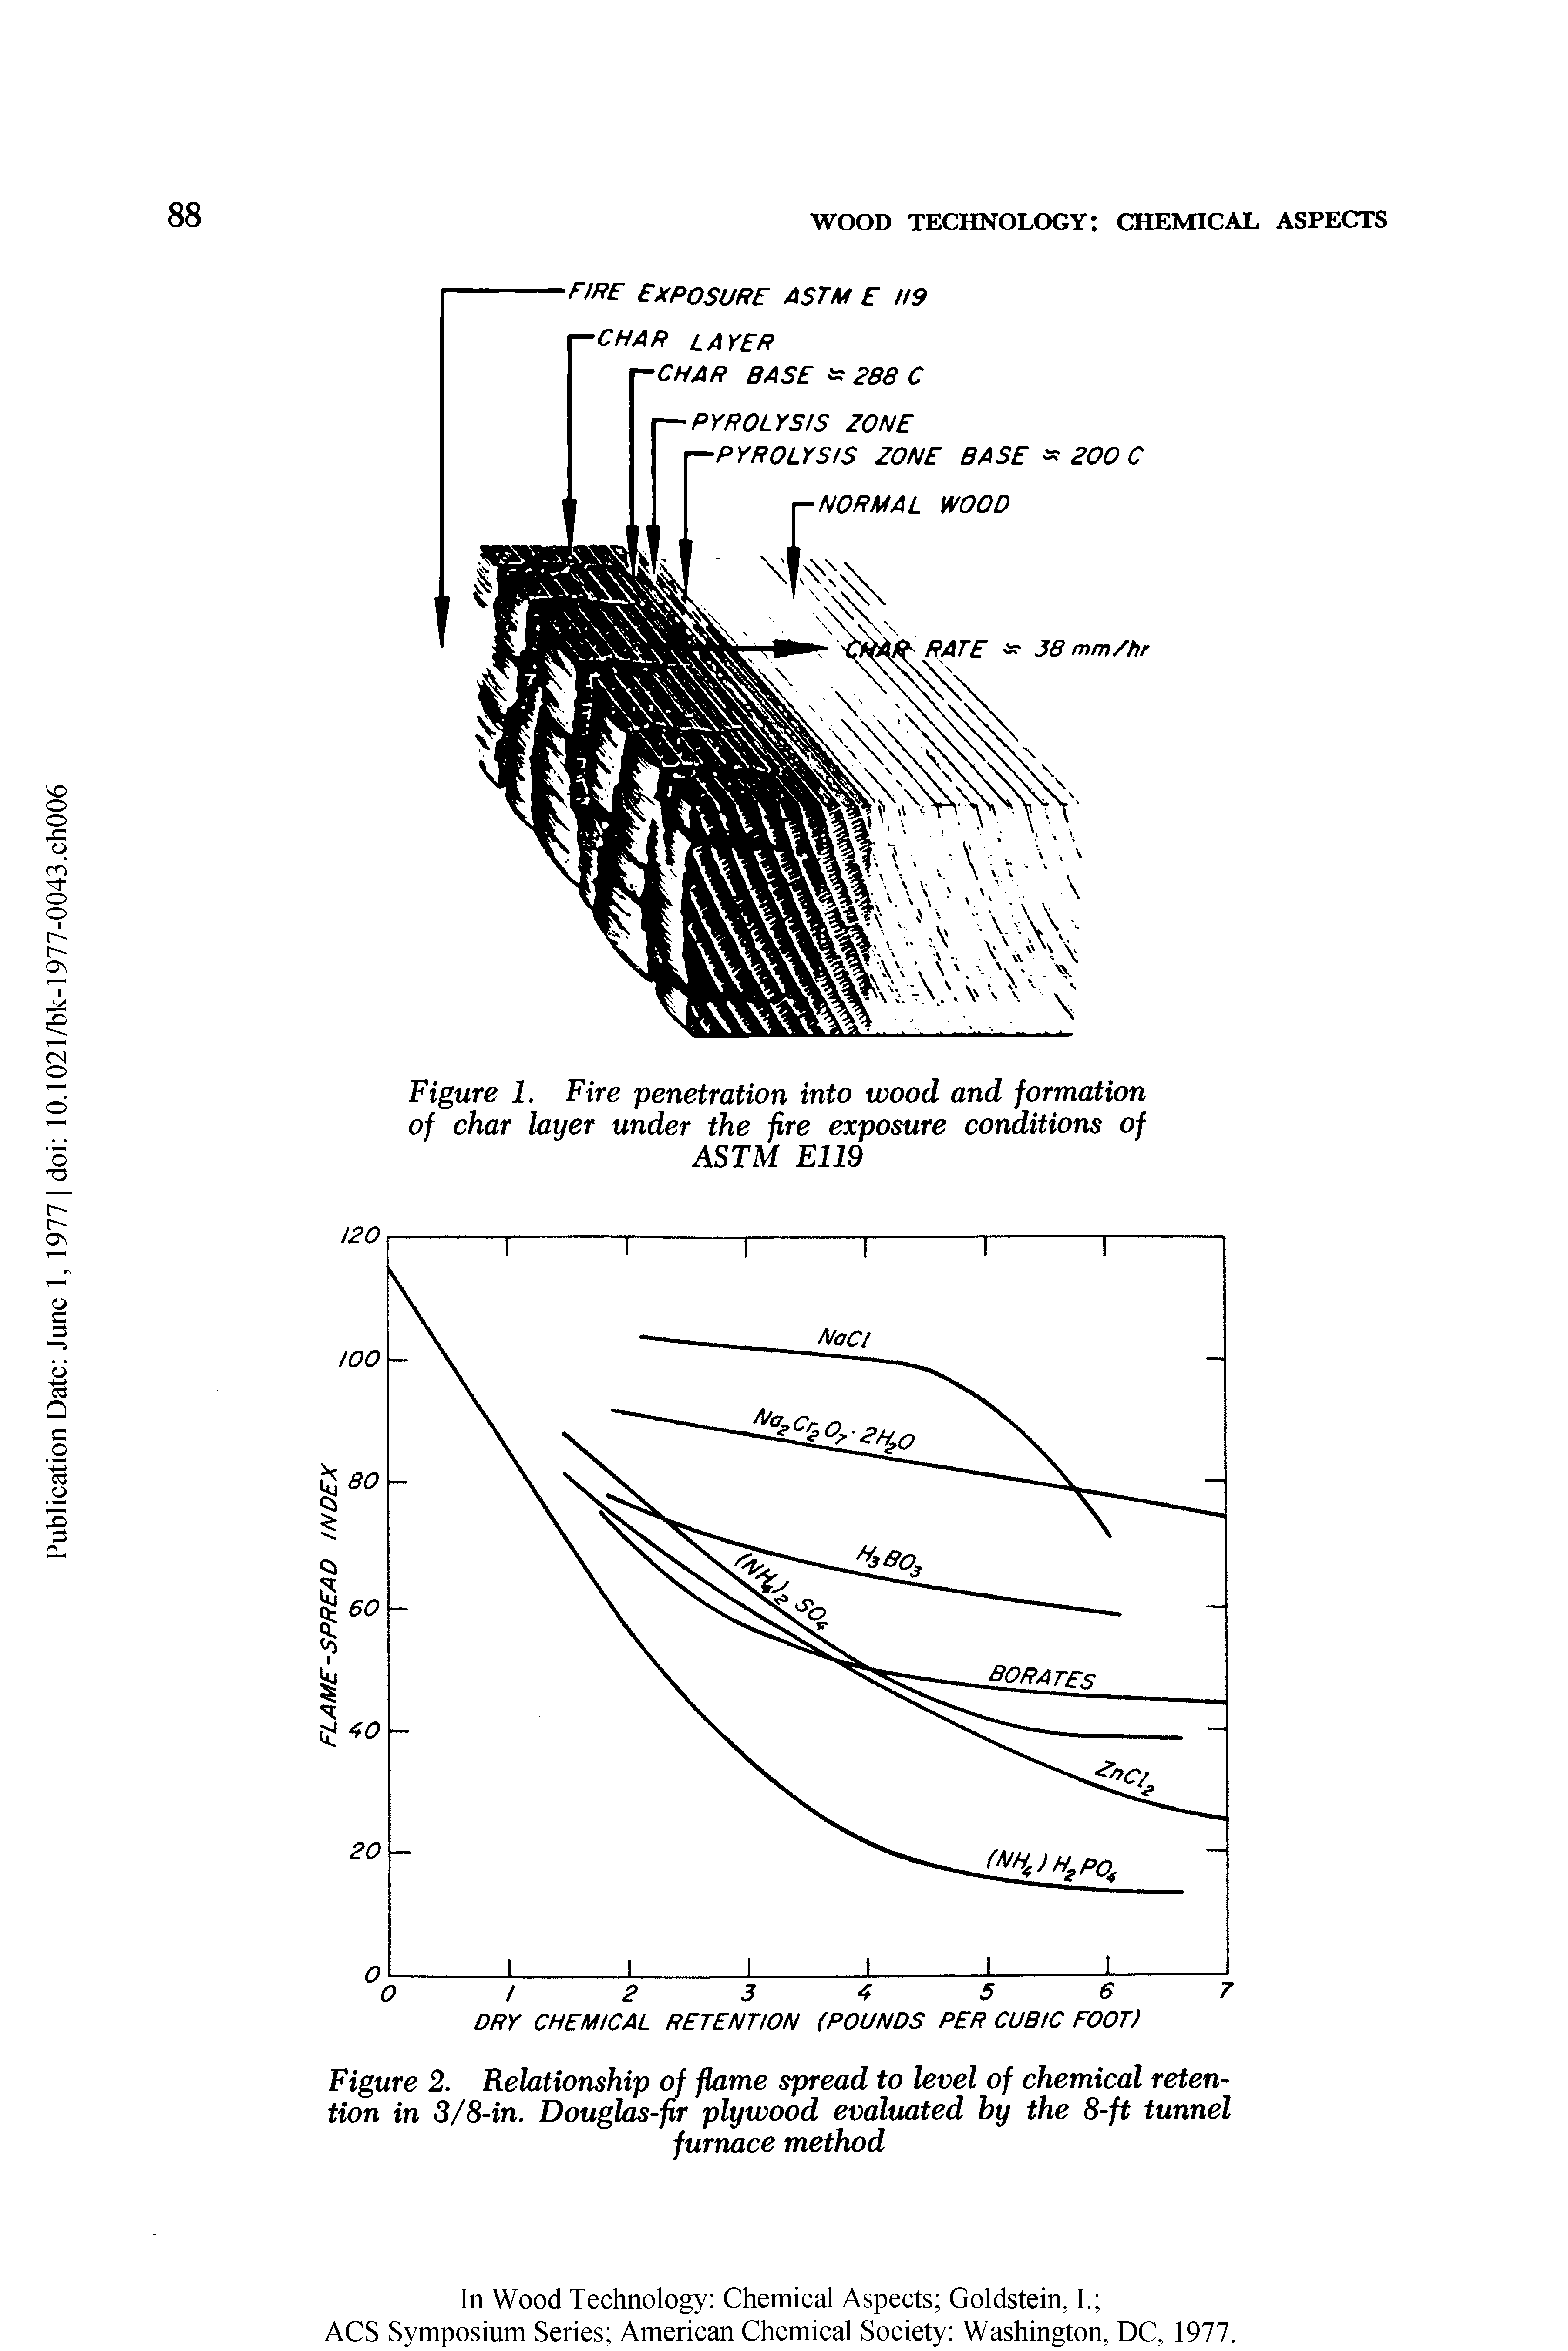 Figure 2. Relationship of flame spread to level of chemical retention in 3/8-in. Douglas fir plywood evaluated by the 8-ft tunnel furnace method...